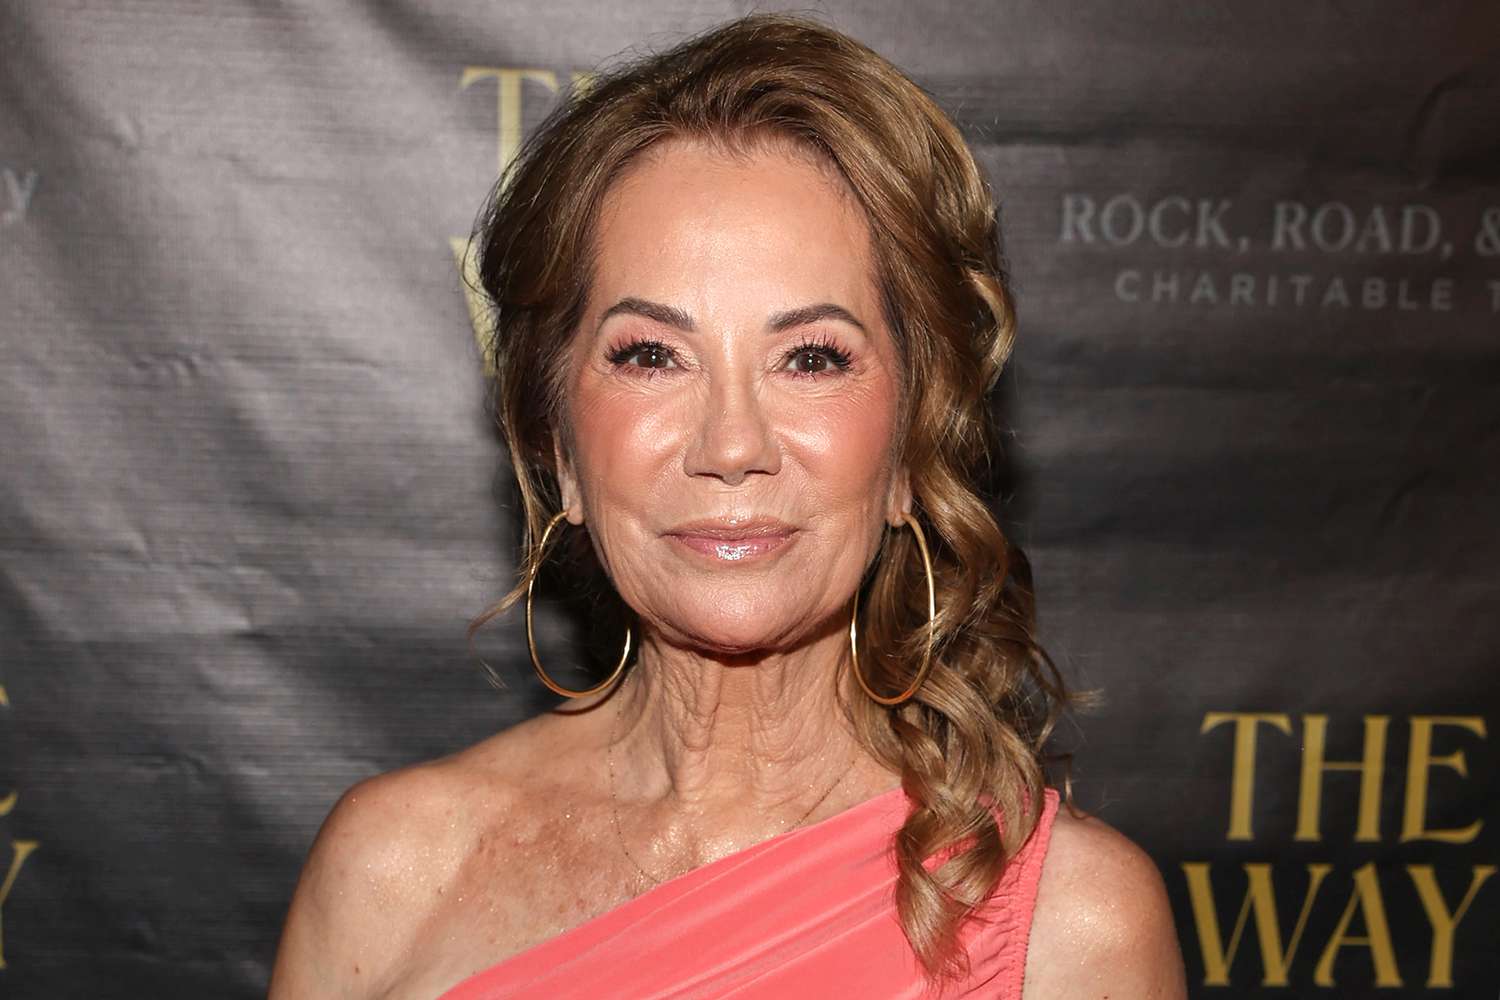 Kathie Lee Gifford Reveals She Underwent Hip Replacement Surgery but Is Leaning into 'Hope' amid Her Recovery (Exclusive)